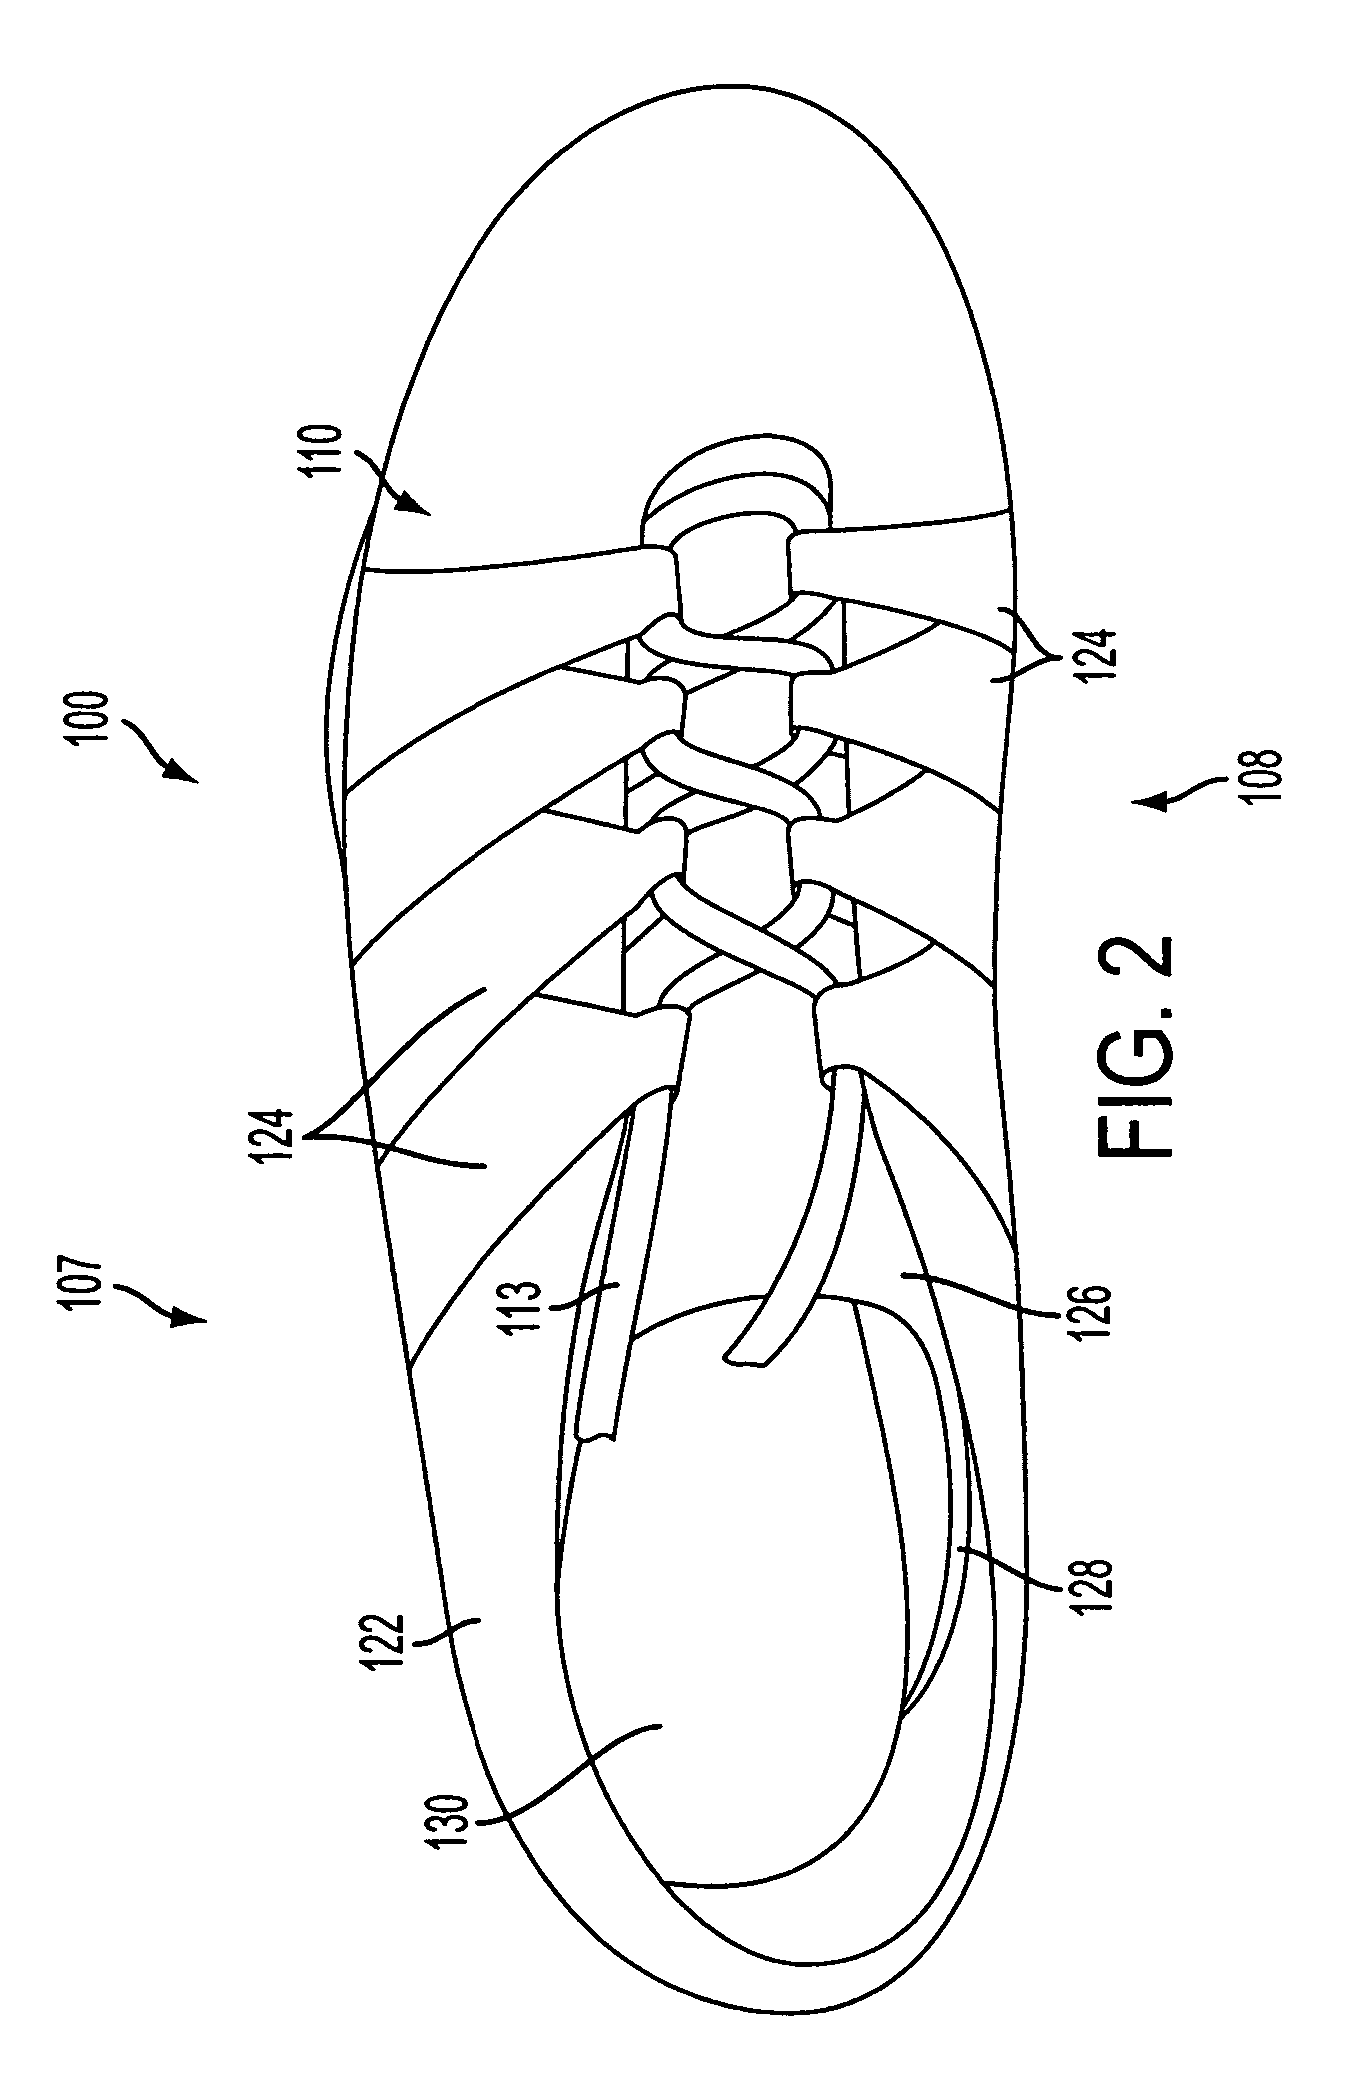 Article of footwear with a flexible arch support